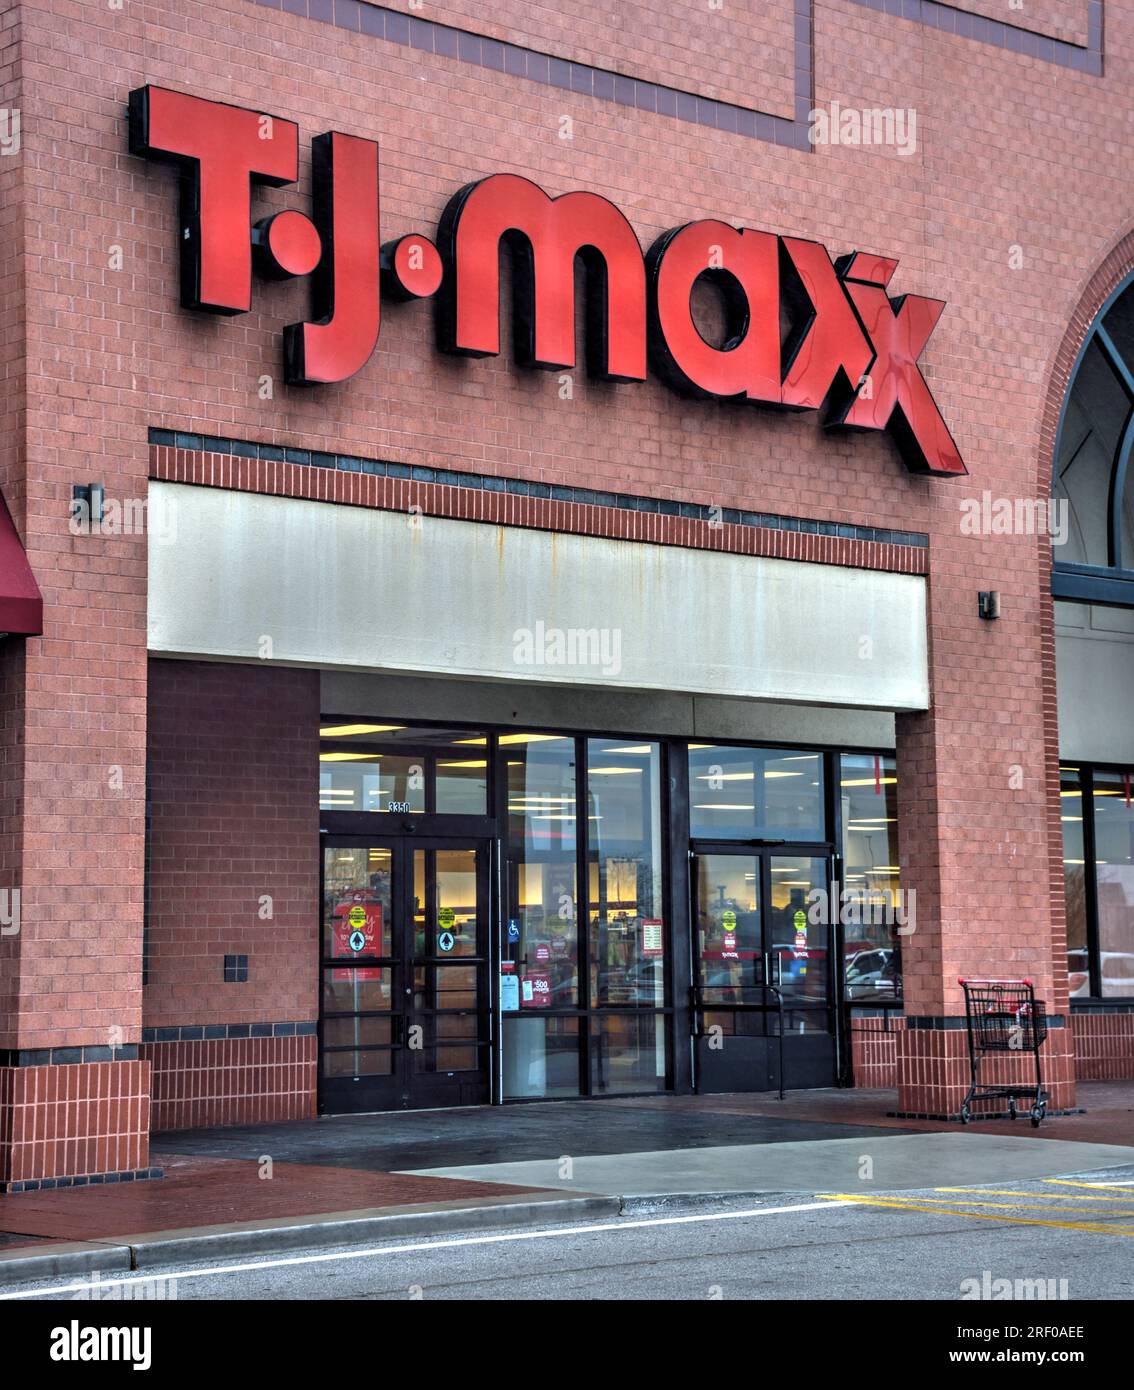 Springfield, Missouri - March 20, 2019: T.J. Maxx Retail Store Location. T.J Maxx is a discount retail chain featuring brand-name apparel and shoes. Stock Photo